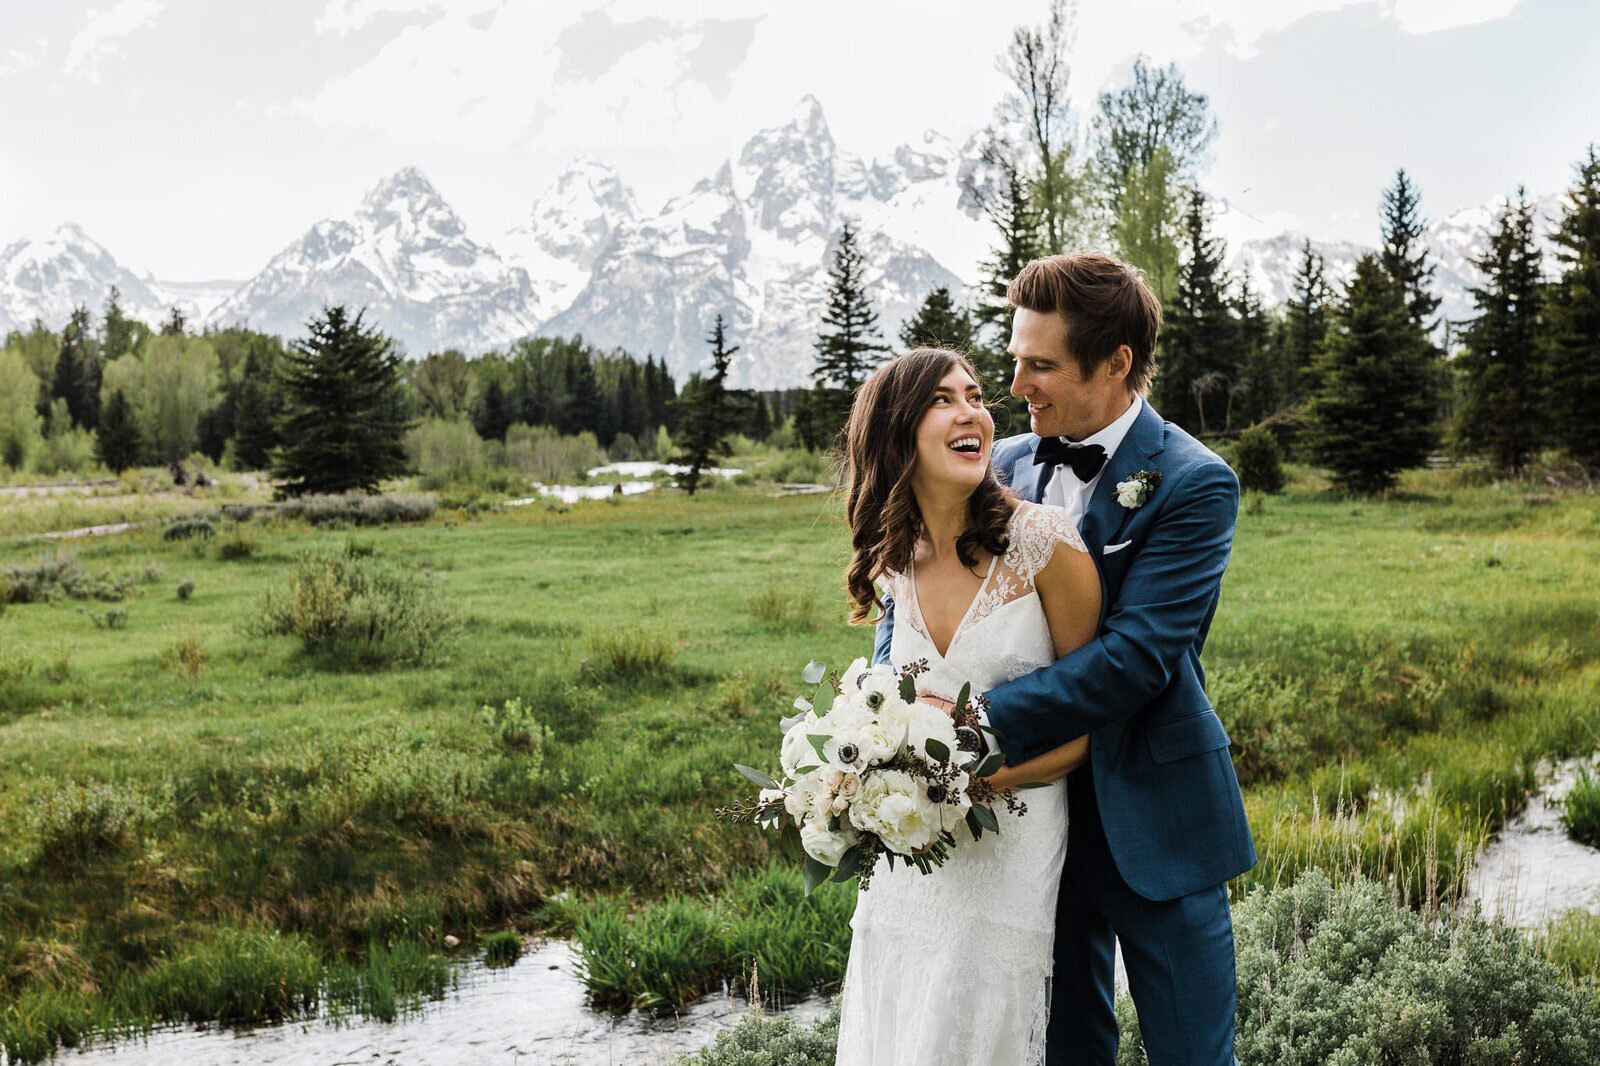 A couple laughs together near a river on their wedding day in Grand Teton National Park